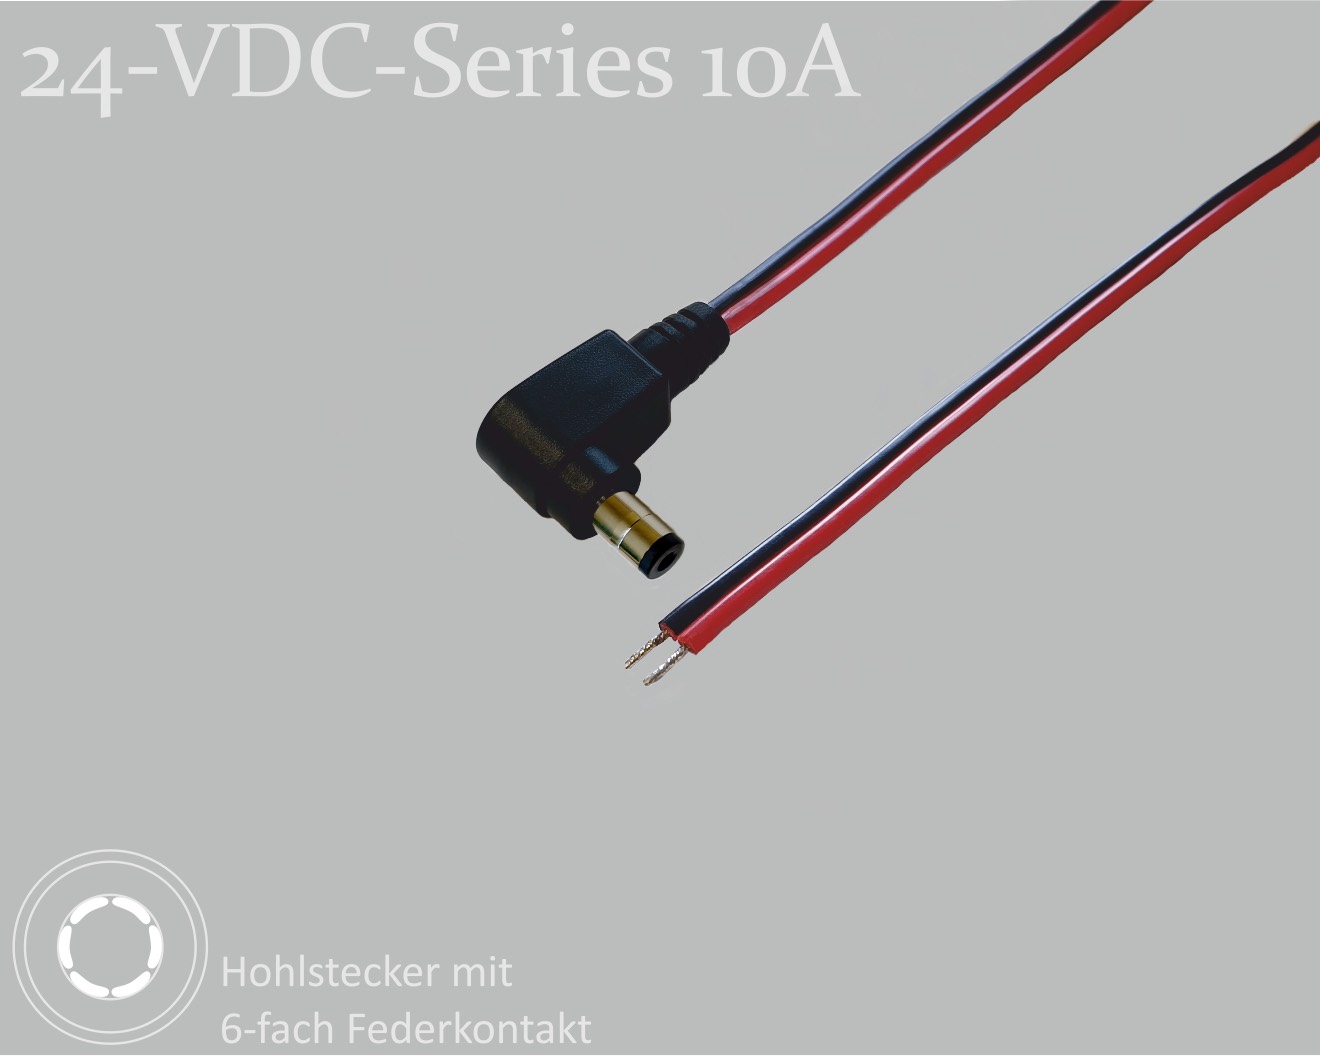 24-VDC-Series 10A, DC connection cable, DC right-angle plug with 6-spring contact 2.5x5.5x9.5mm, flat cable 2x0.75mm², red/black, tinned ends, 1.5m